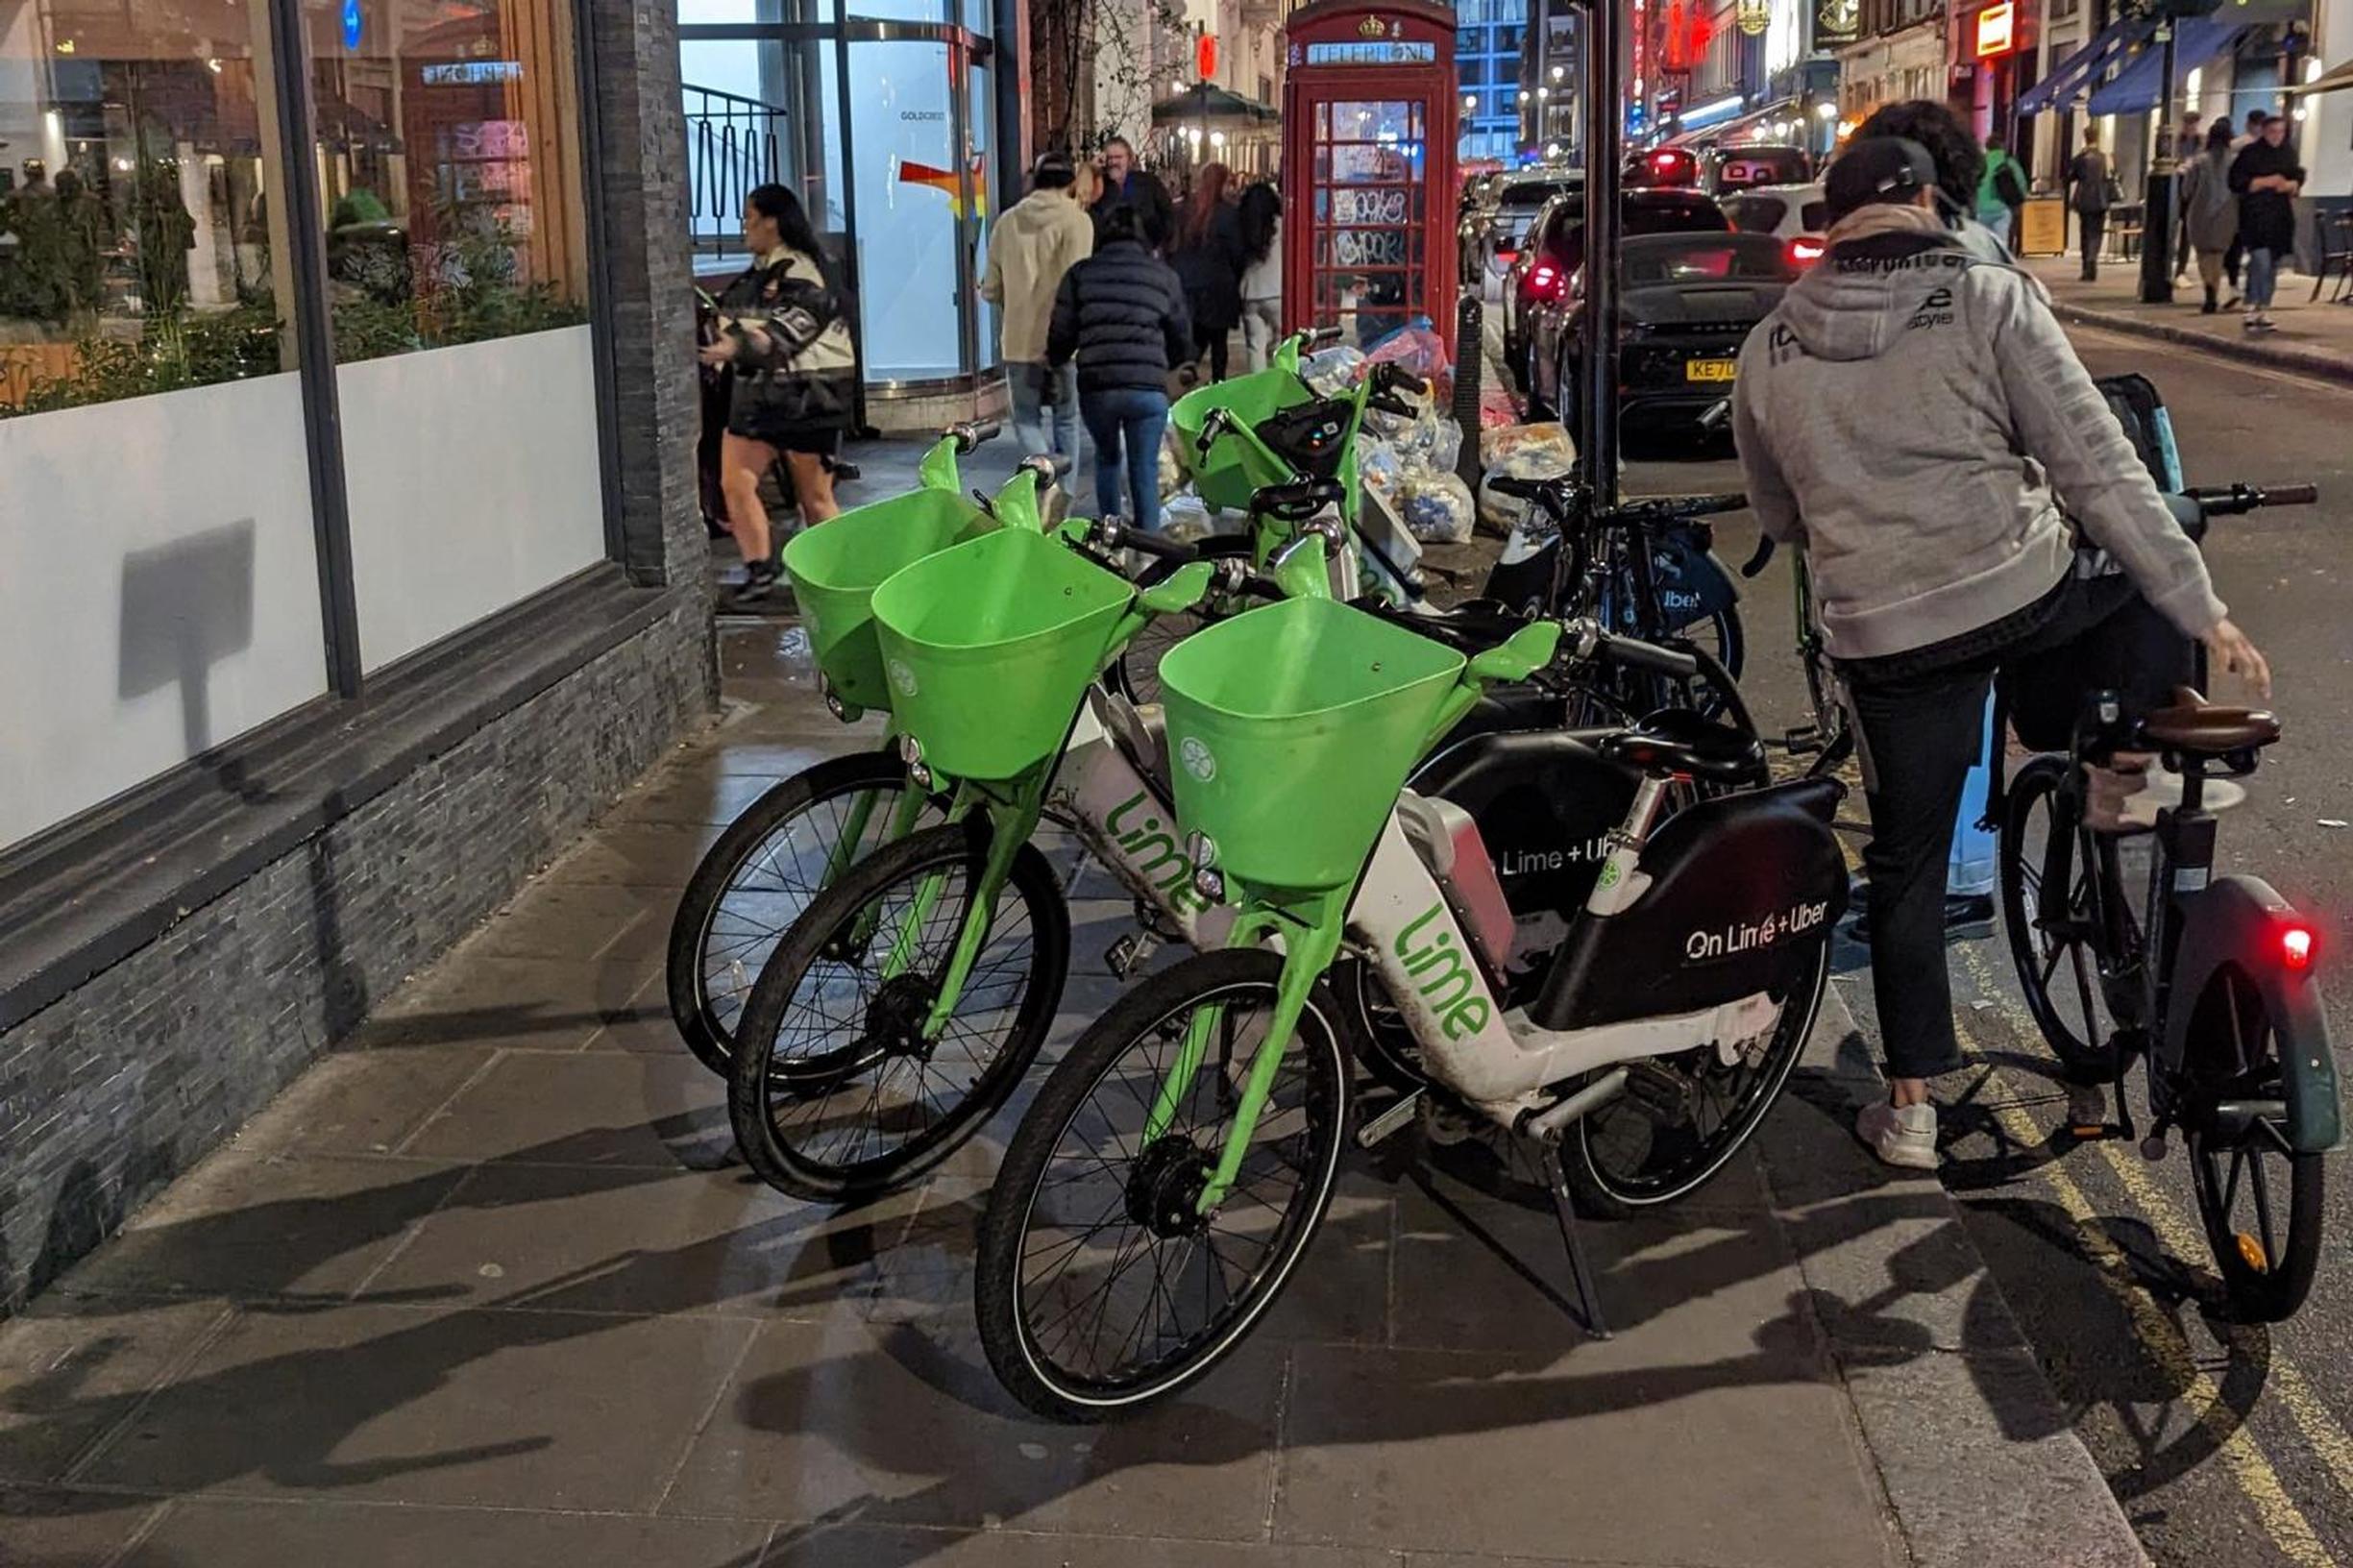 Obstructively parked Lime bikes